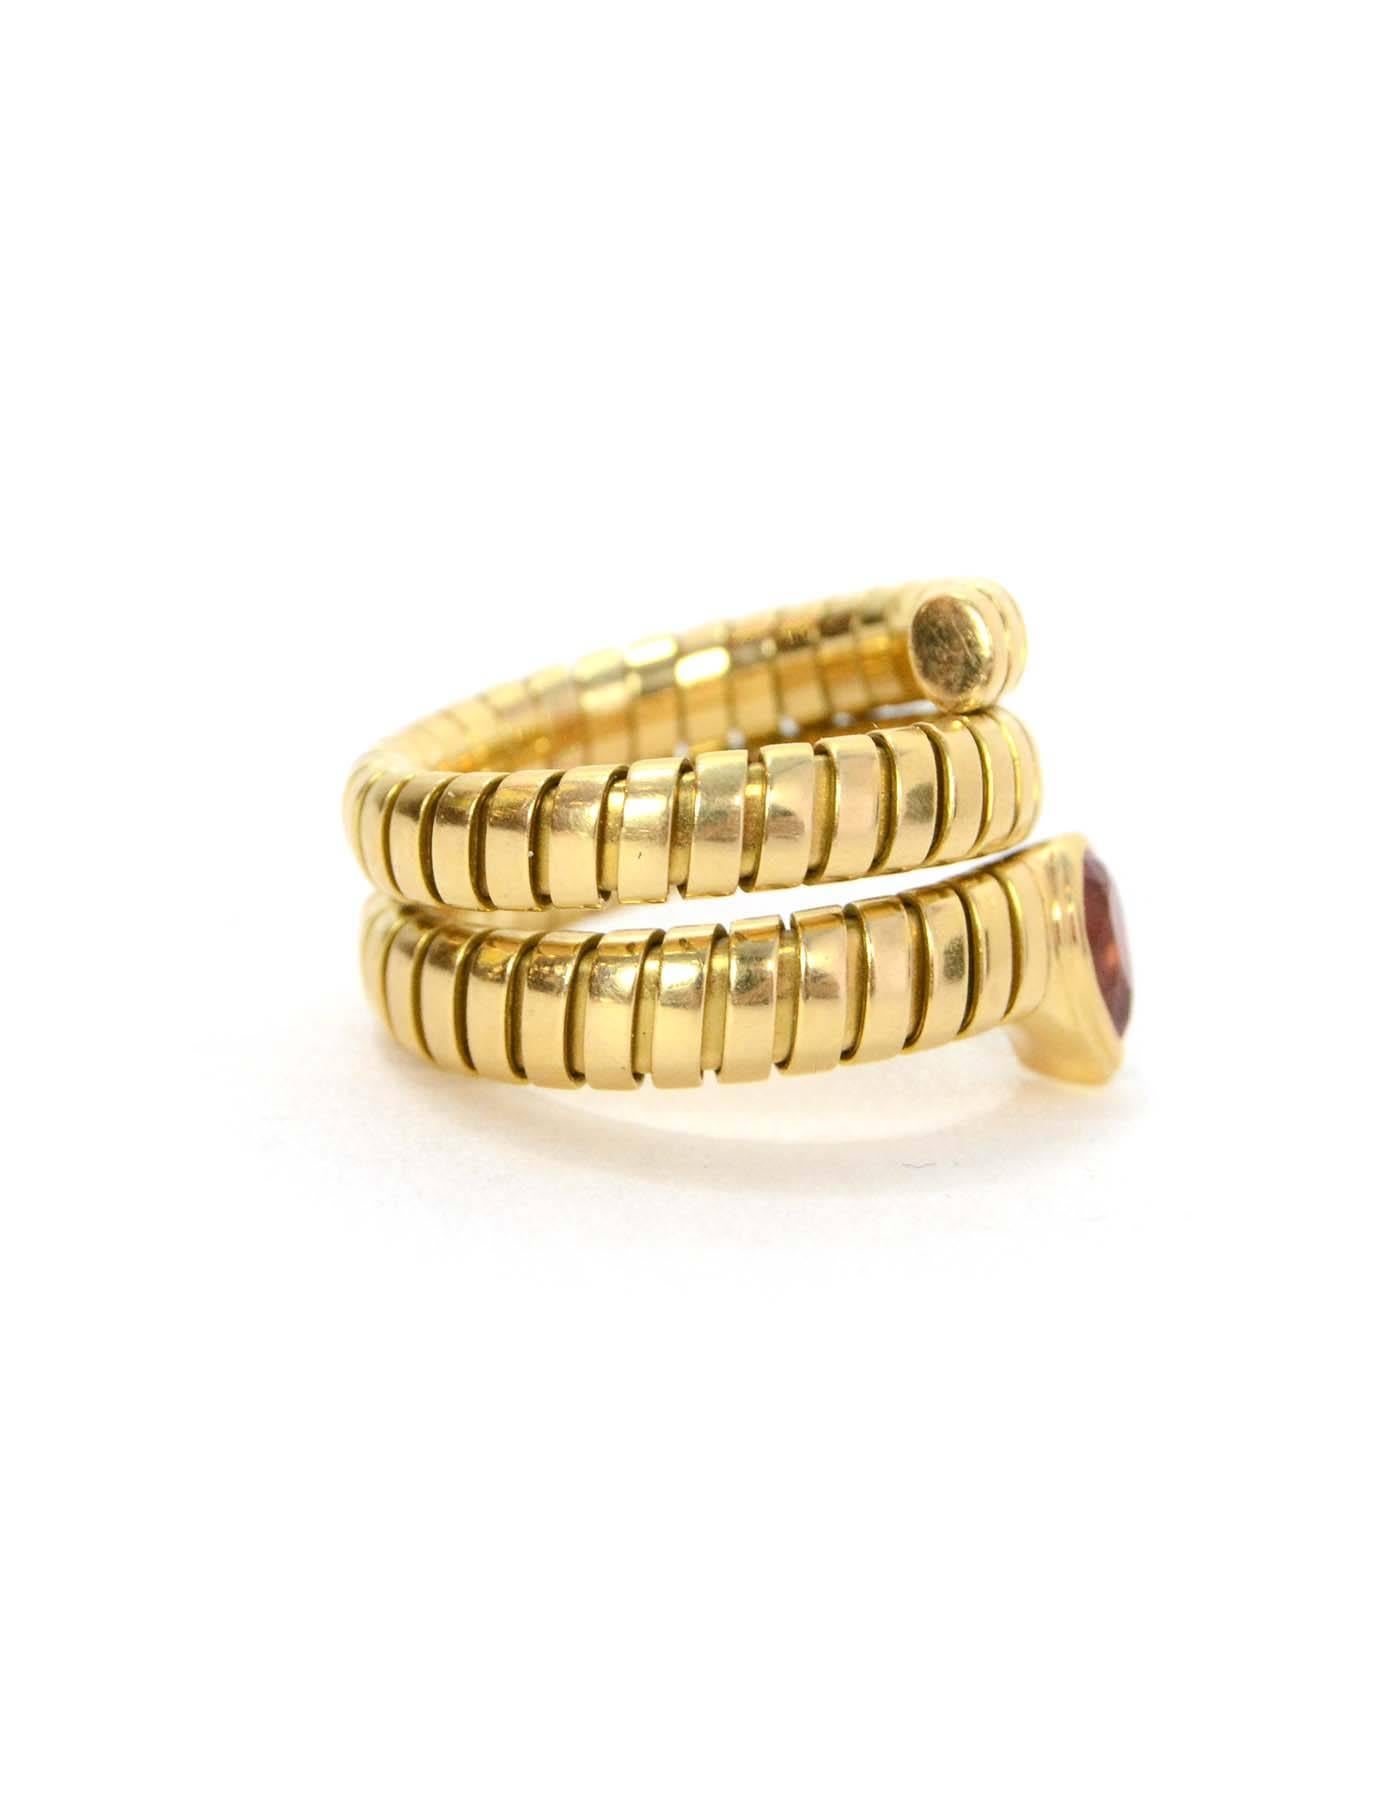 Bulgari 18k Gold Serpenti Tubogas Pink Tourmaline Ring 
Features flexibility for sizing

-Color: Gold and pink
-Materials: 18k gold and pink stone
-Closure: None
-Stamp: Bvlgari 10MI 750
-Retail Price: $6,750 + tax
-Overall Condition: